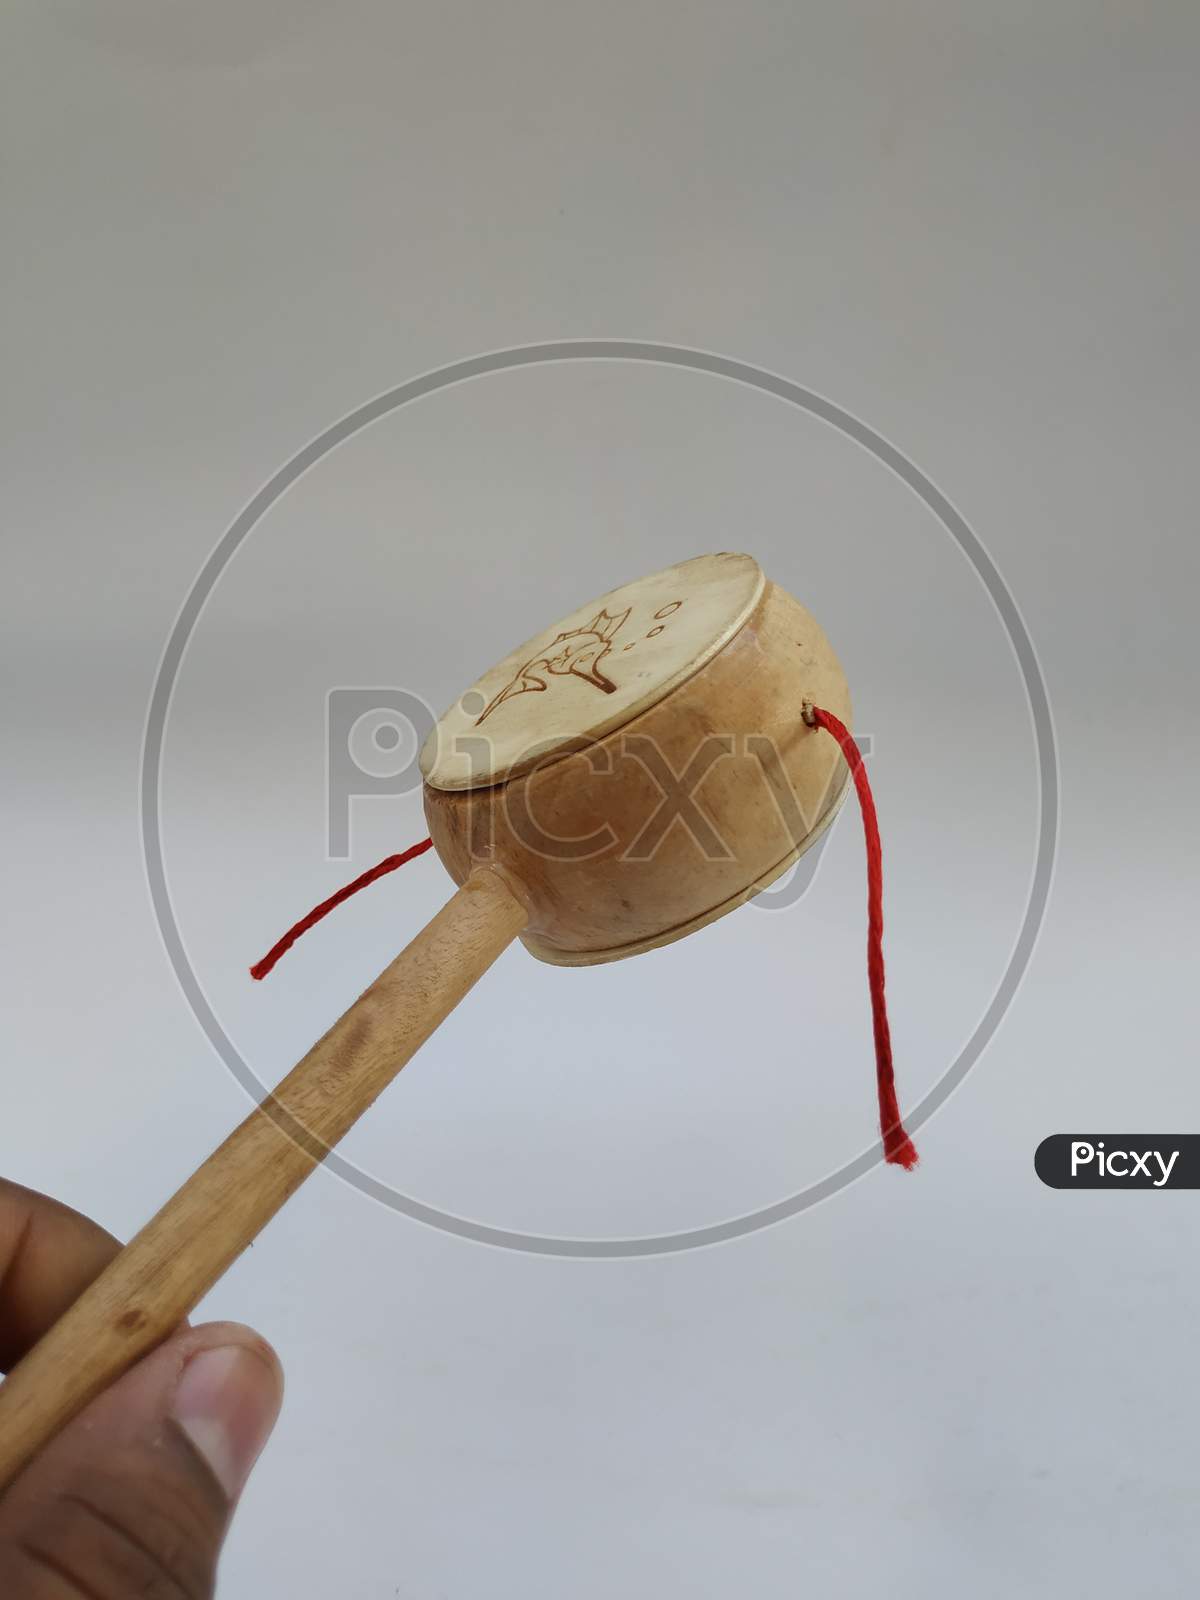 Kids Muscial Toys Mucca Sacra Wooden Rattle Toy Damru isolated on white background